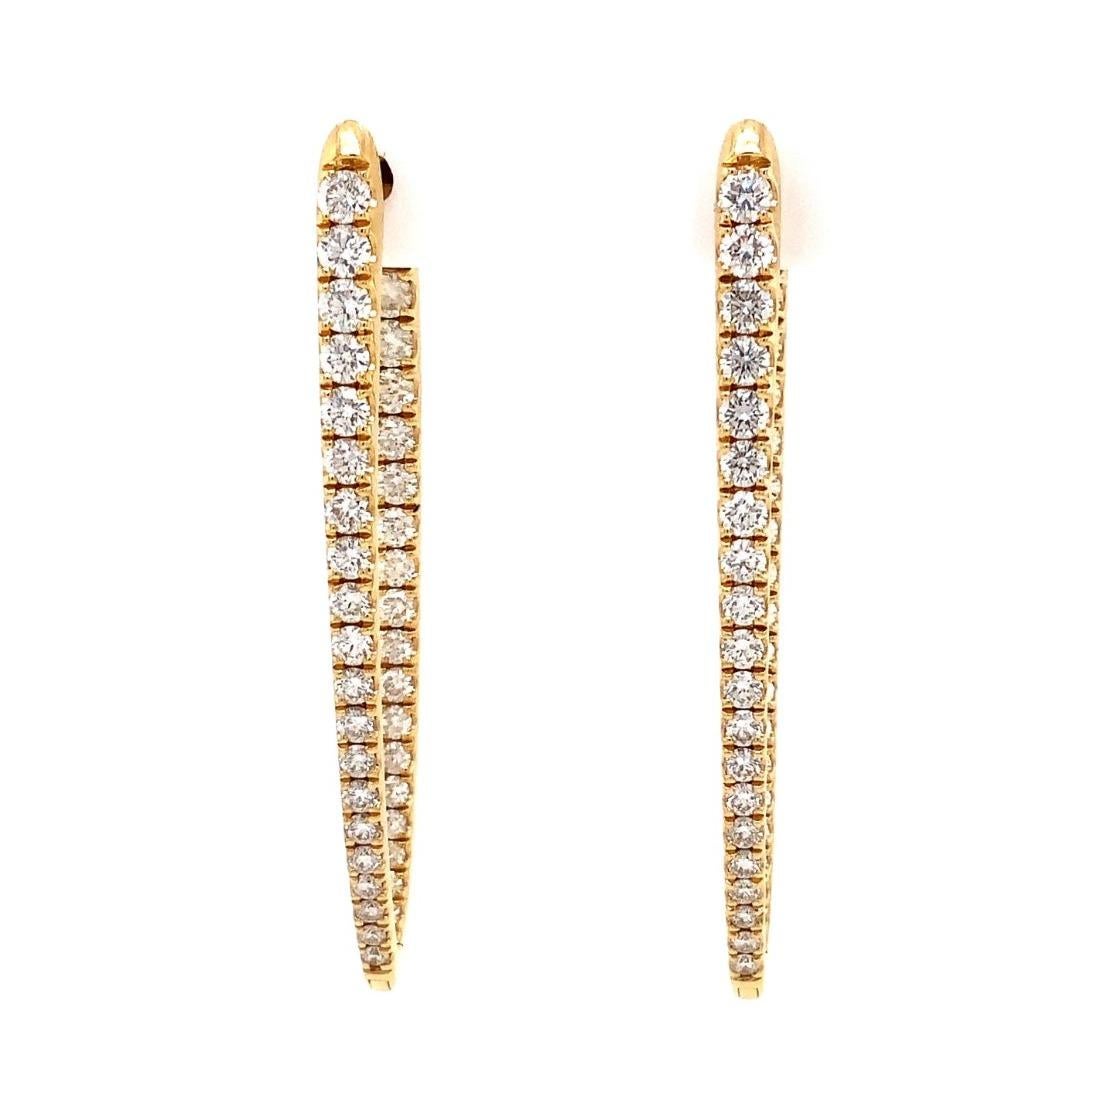 This Memoire Imperial Collection Diamond Hoop Earring Set is crafted from 18K Yellow Gold, containing 74 Diamonds that total 1.67 carats. Of F-G Color, these Diamonds have a VS1-SI1 Clarity, with a diameter of 40 mm and a width of 13mm. This Earring